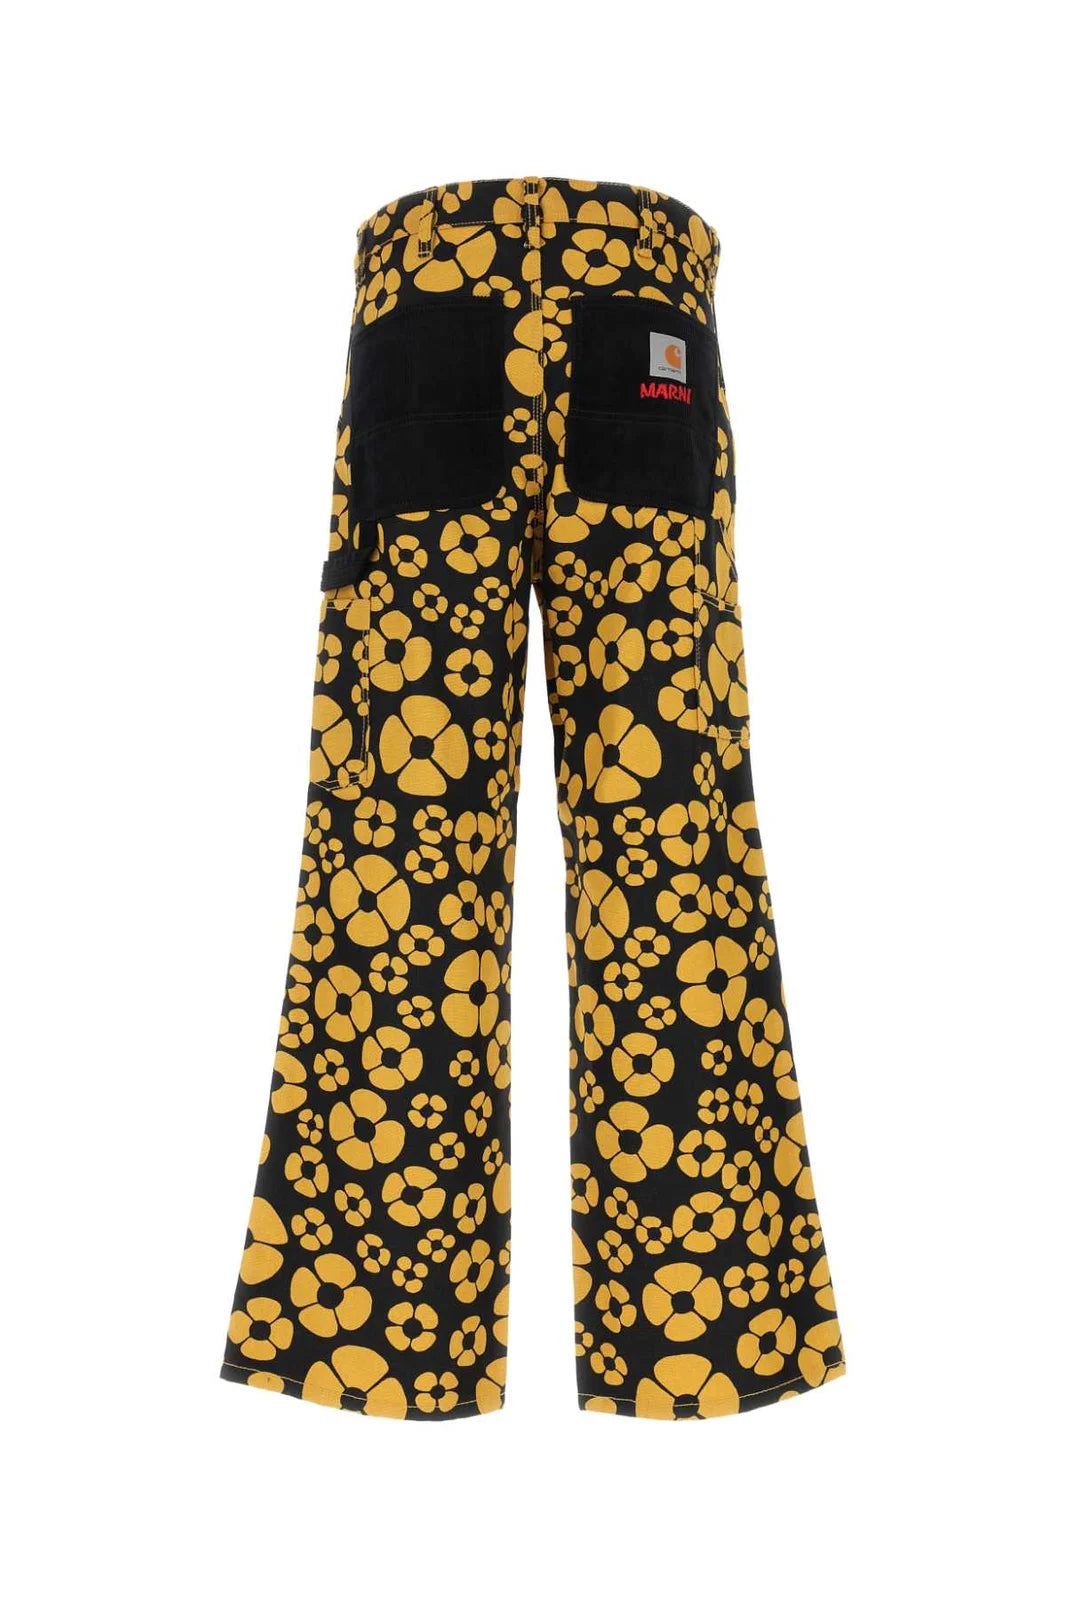 MARNI X CARHARTT FLORAL PRINTED JEANS YELLOW